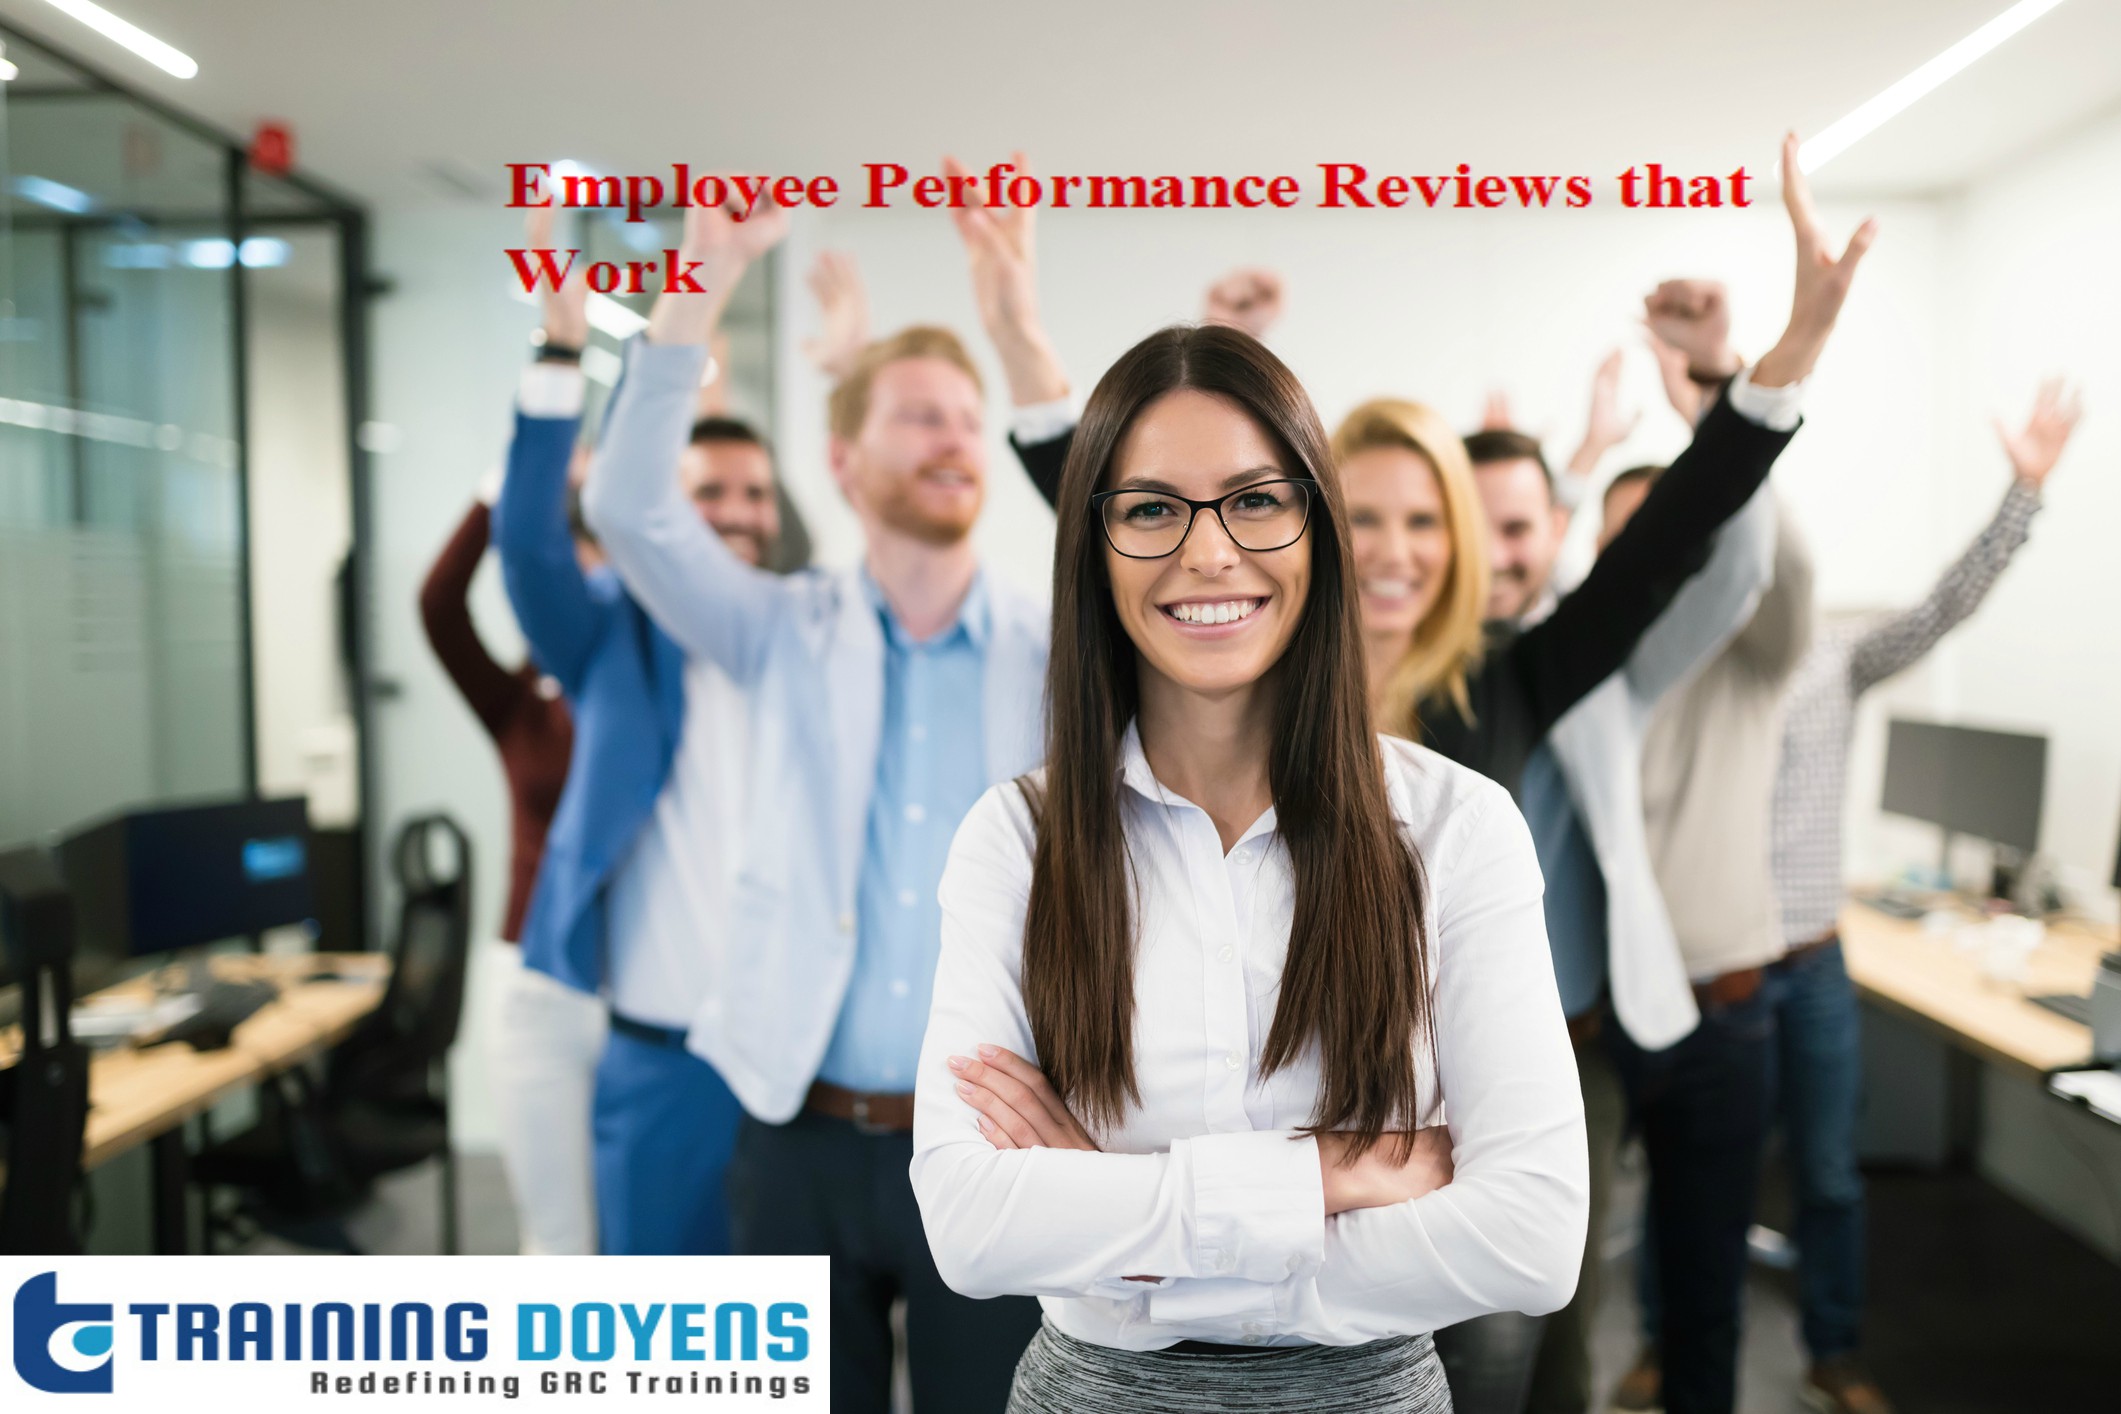 Employee Performance Reviews that Work